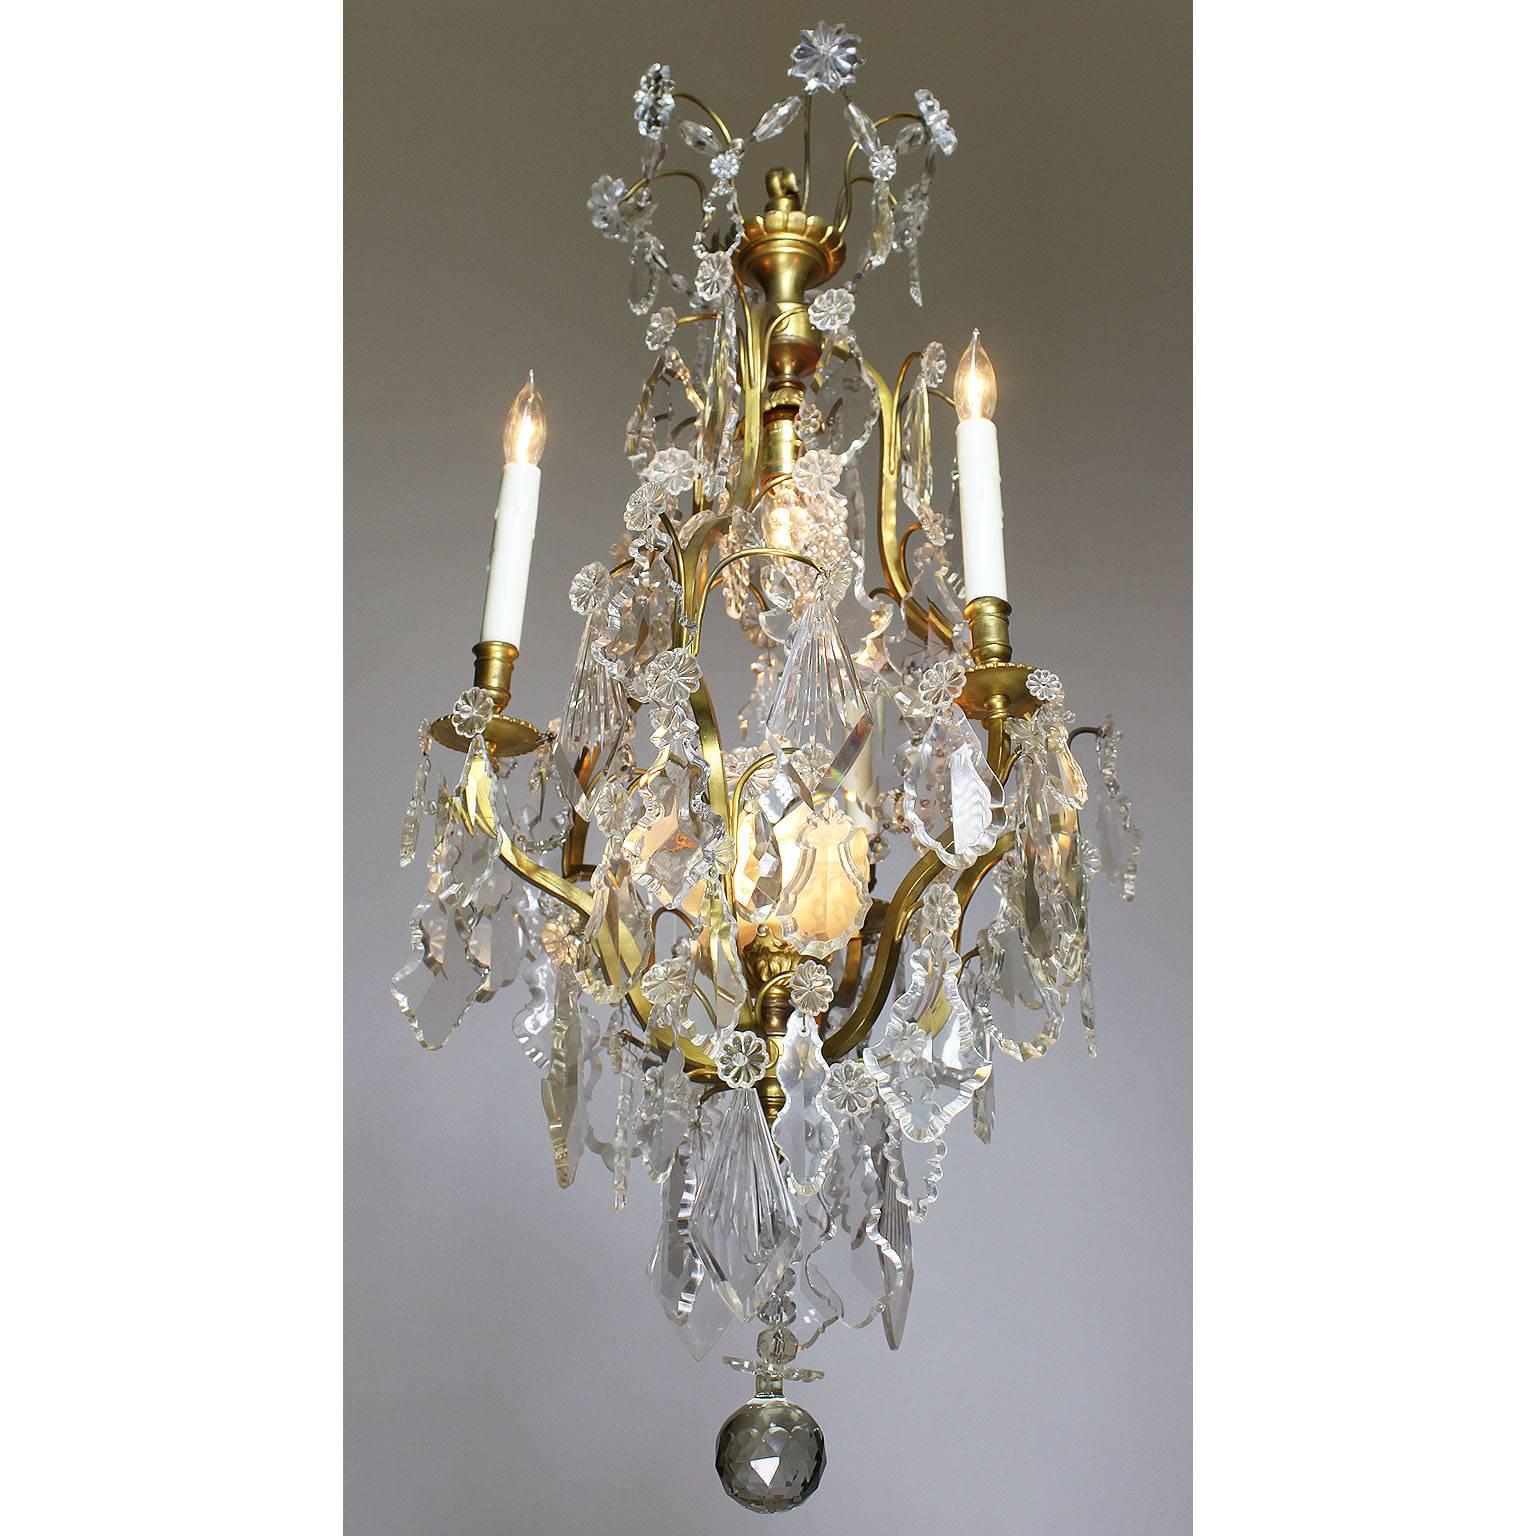 A French early 20th century Louis XV style gilt bronze and cut-glass three-light chandelier. The elongated gilt-metal body with cut-glass pendants, surmounted with three scrolled candle amrs and two interior lights, the lower one with a floral